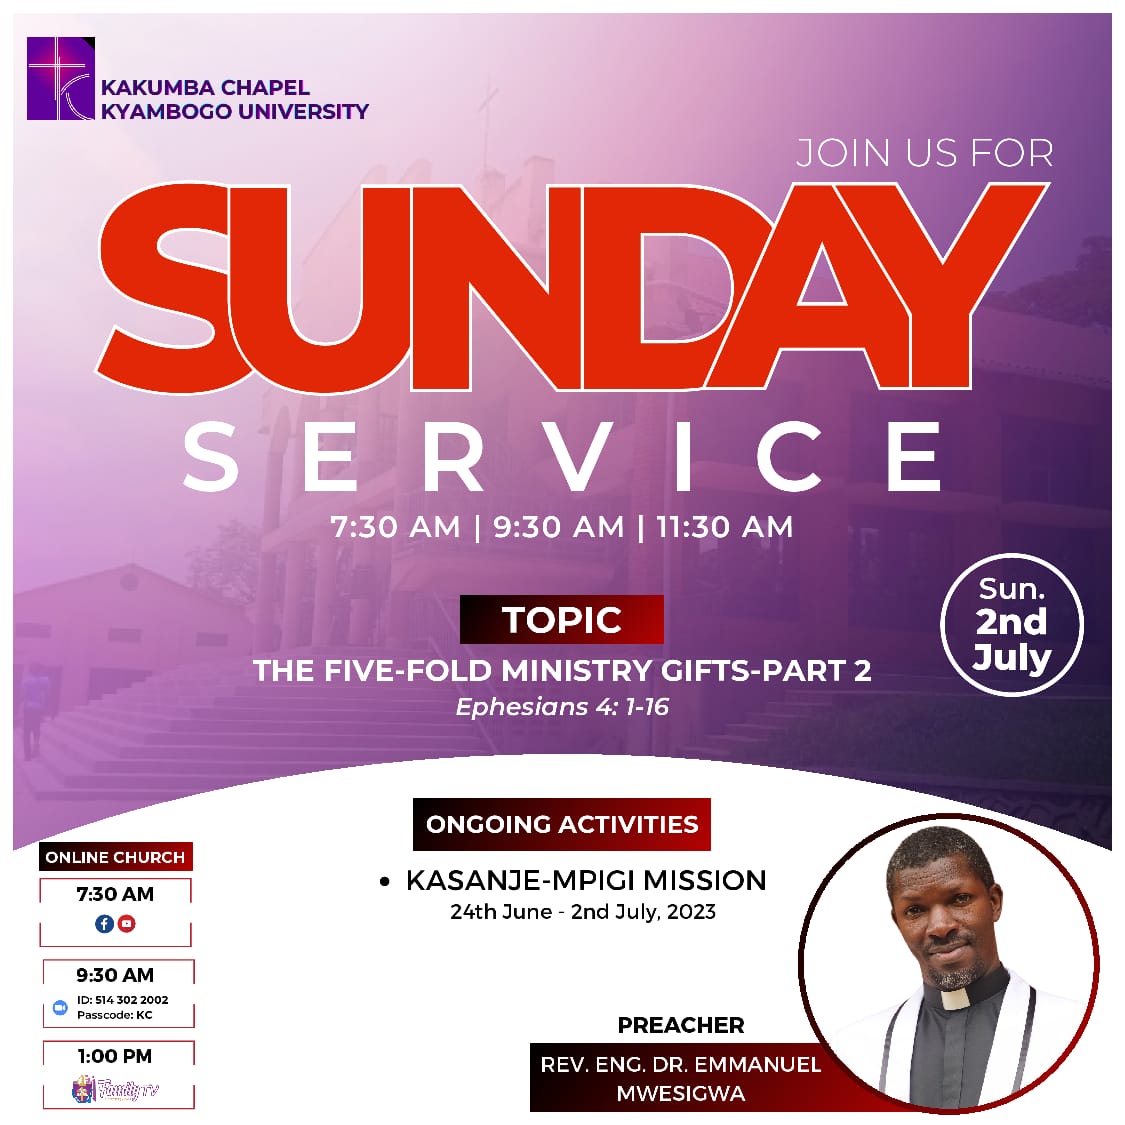 SUNDAY SERVICE @ 7:30am, 9:30 am also on zoom, 11:30am With Rev Eng Dr Emmanuel Mwesigwa Topic: The Five_Fold Ministry Gifts: Part 2 (Ephesians 4:1_16) Zoom link us02web.zoom.us/j/5143022002?p… Meeting ID: 514 302 2002 Passcode: KC.